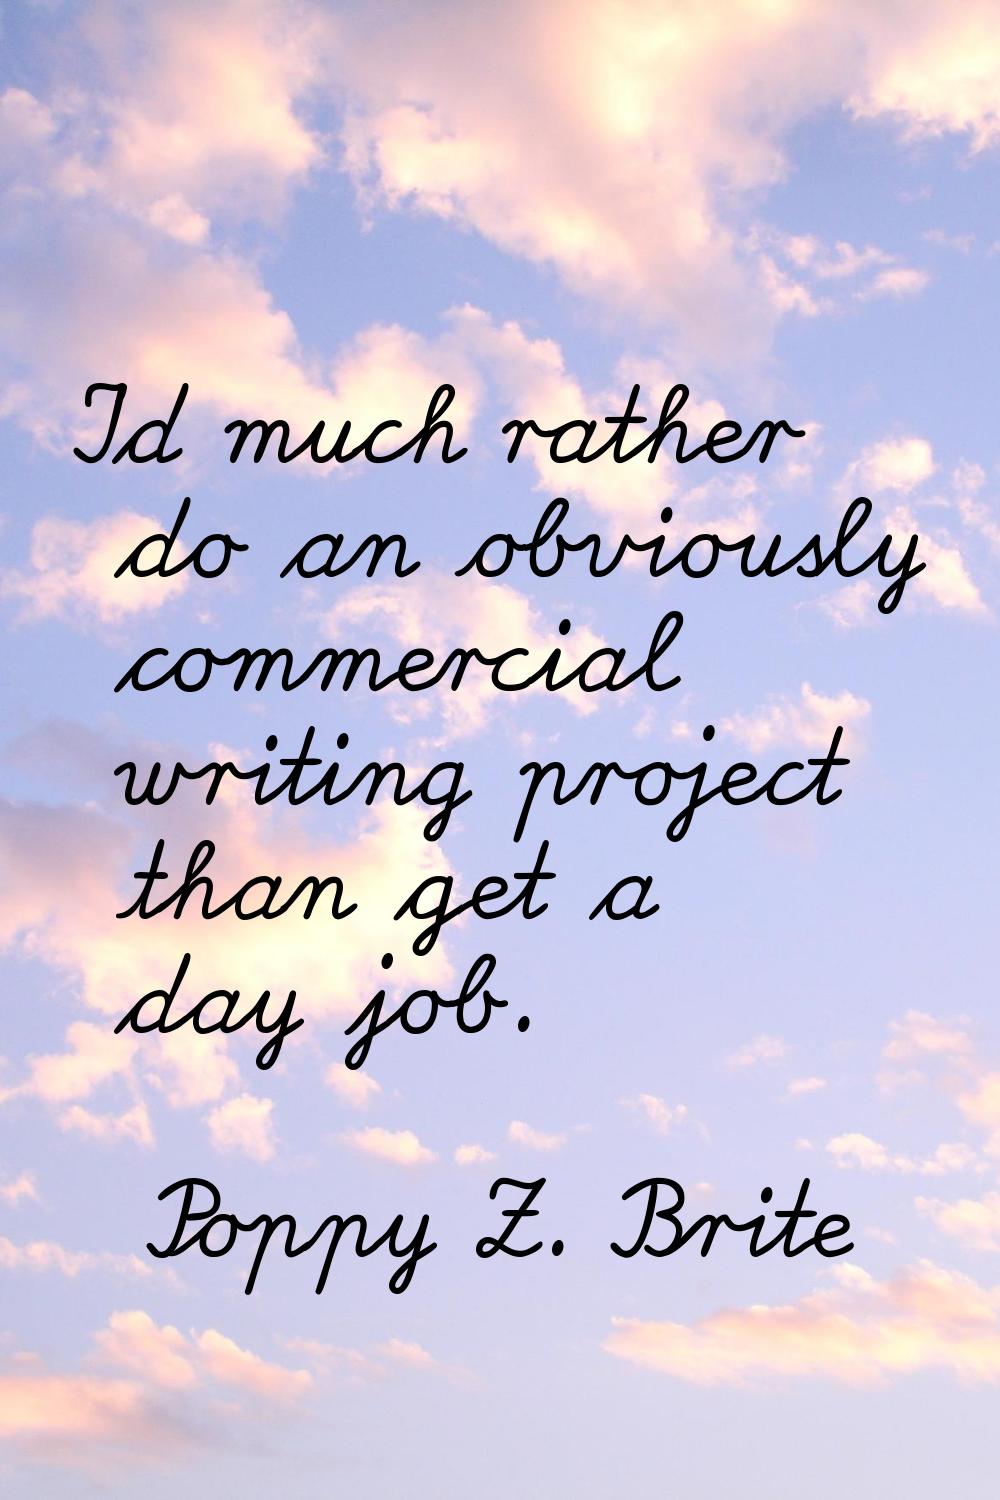 I'd much rather do an obviously commercial writing project than get a day job.